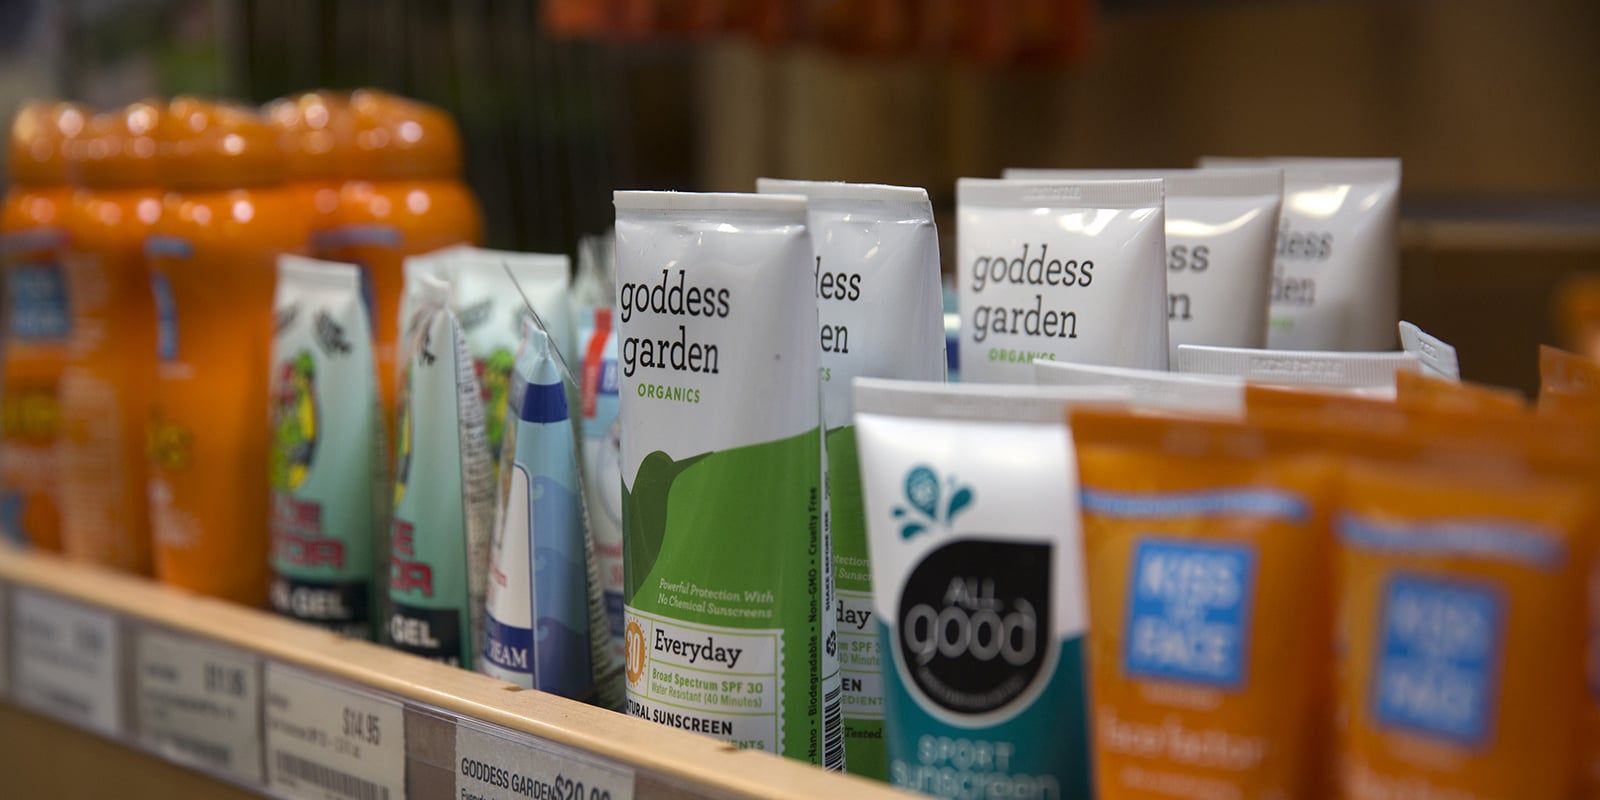 New Sunscreen Labels Include Broad Spectrum and Water Resistance Ratings